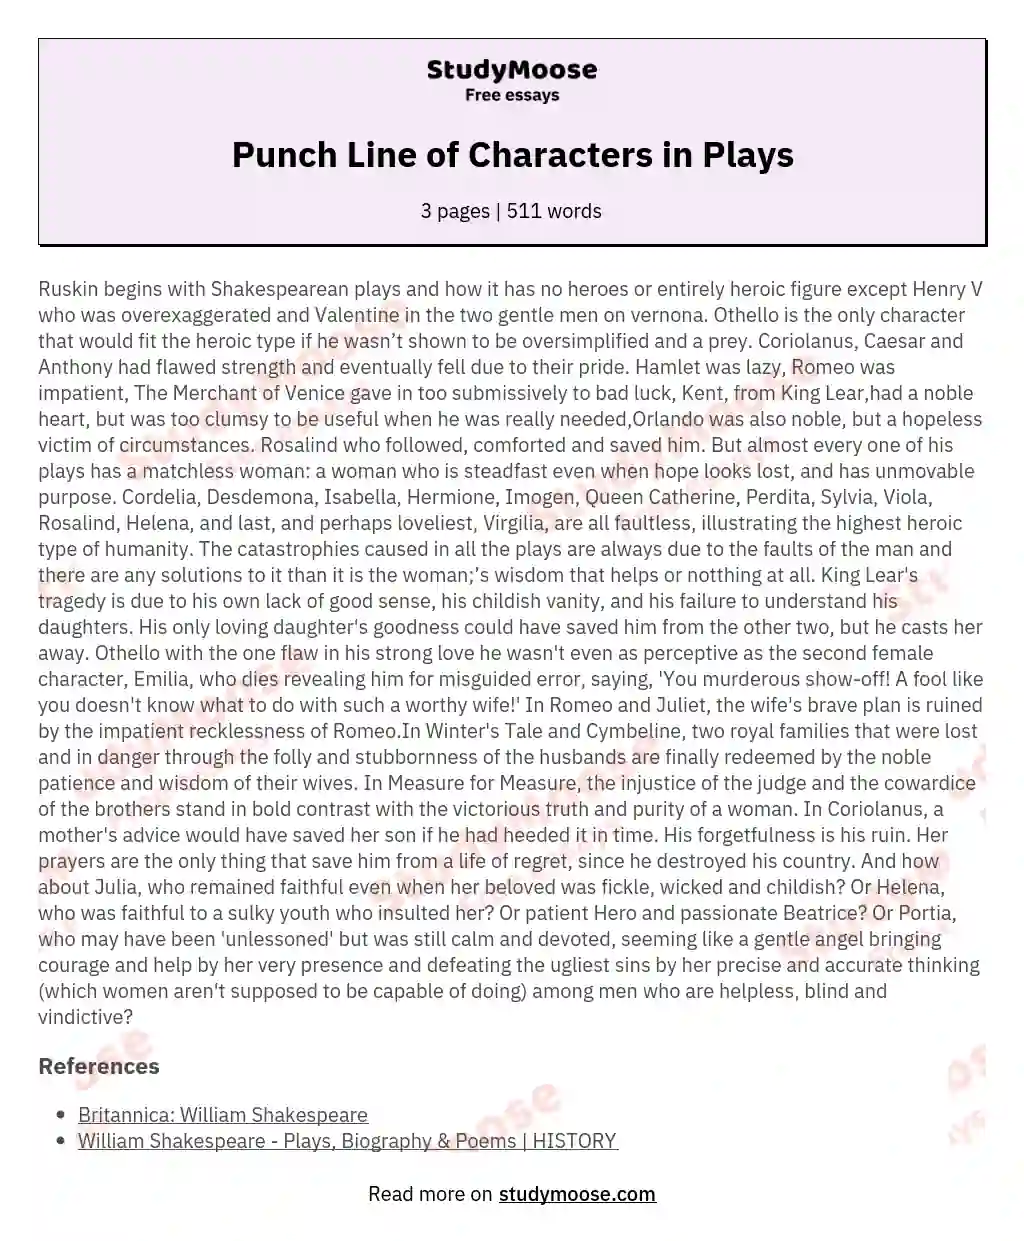 Punch Line of Characters in Plays essay